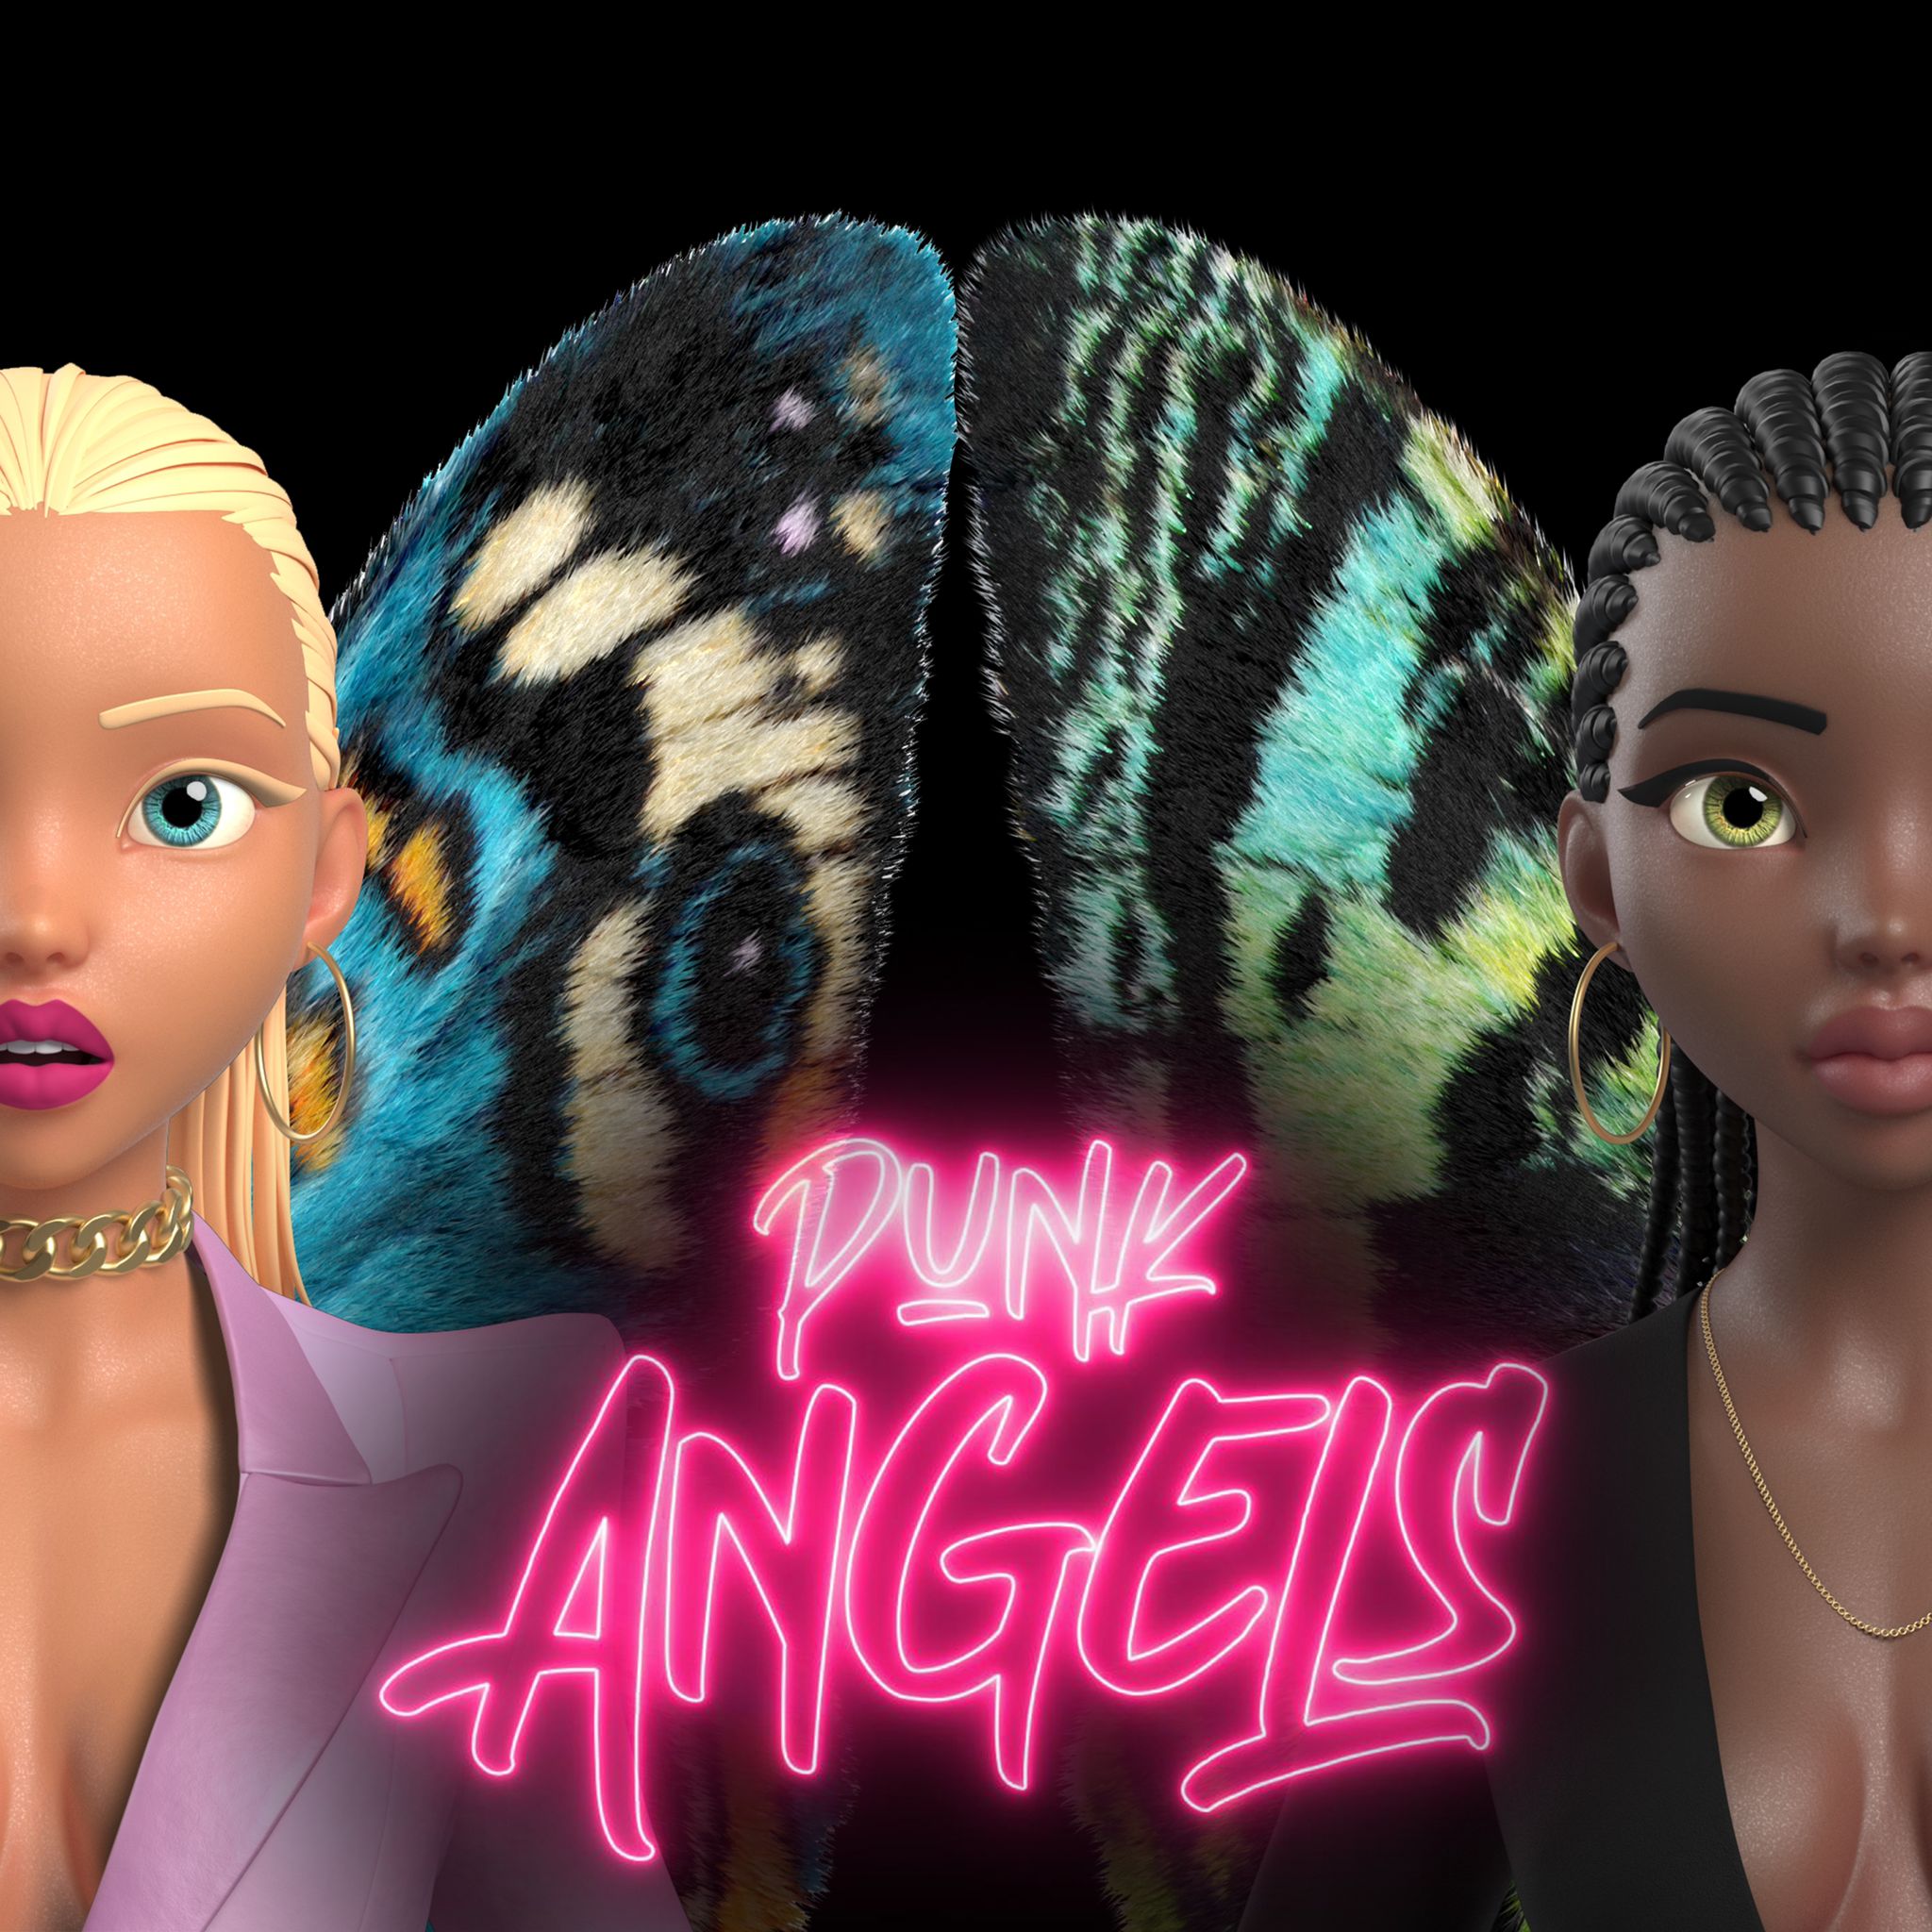 Punk Angels by World-Renowned Artist PunkMeTender Debuts NFT Collection, Incubator and Social Change Movement